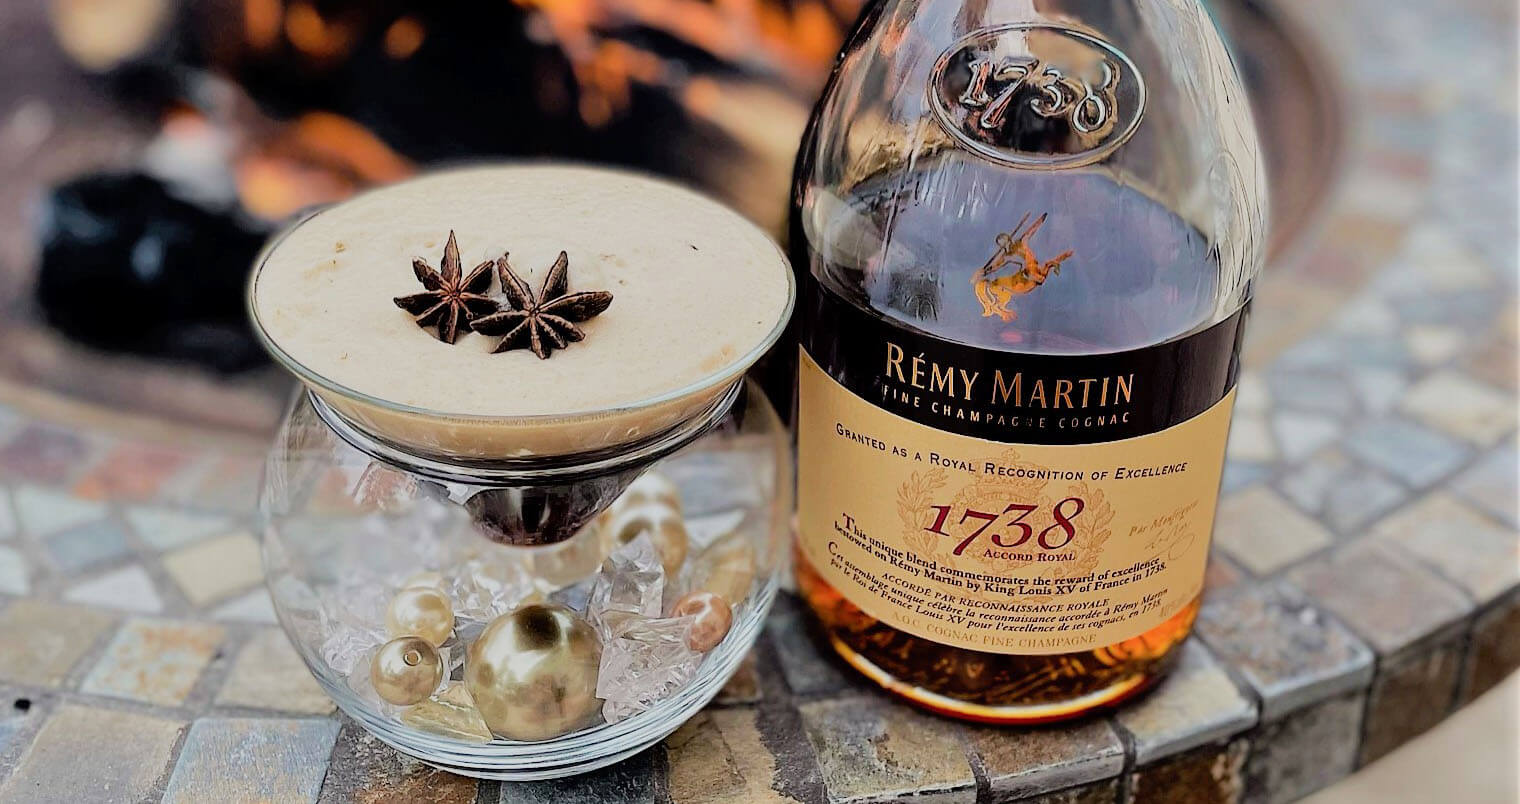 Remy Martini, featured image